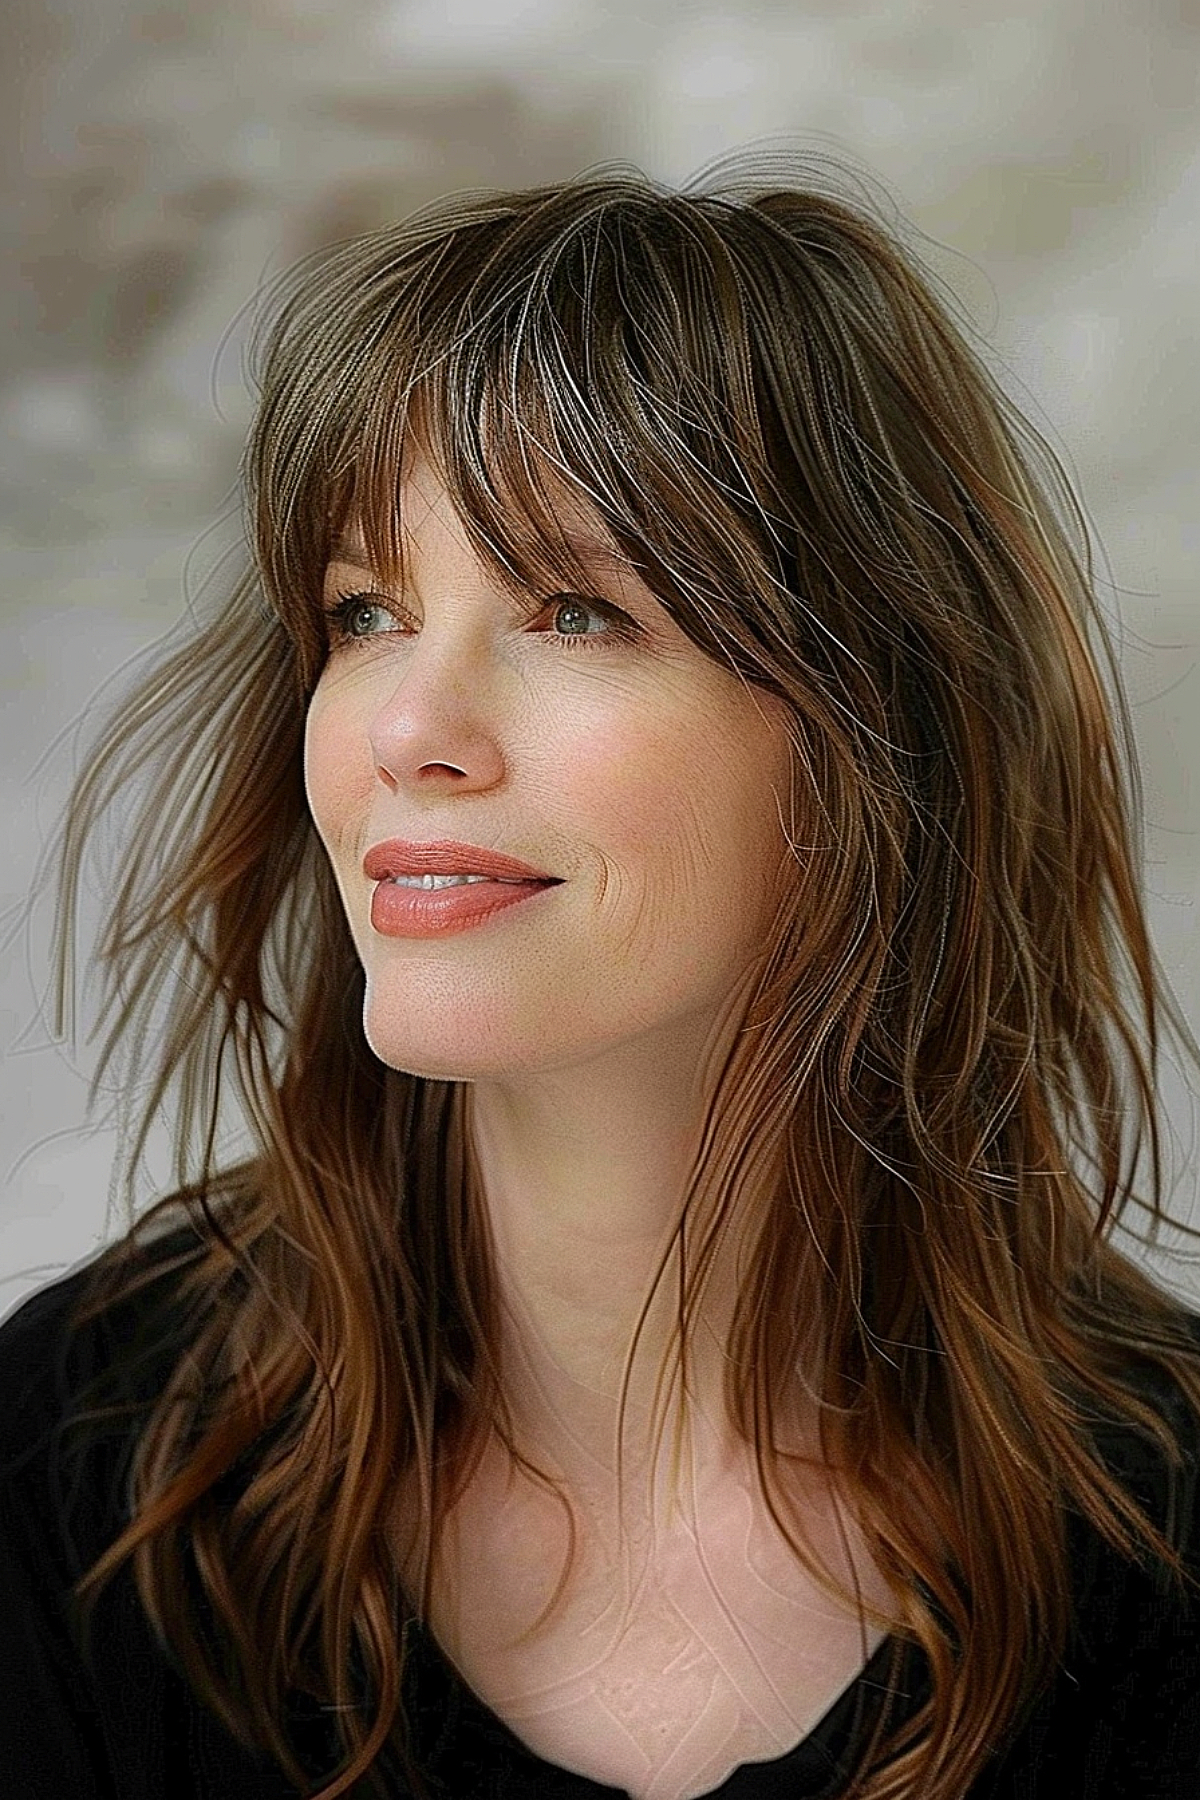 Wavy medium length hair with soft textured bangs creates an elongated face shape and is perfect for women over 40.